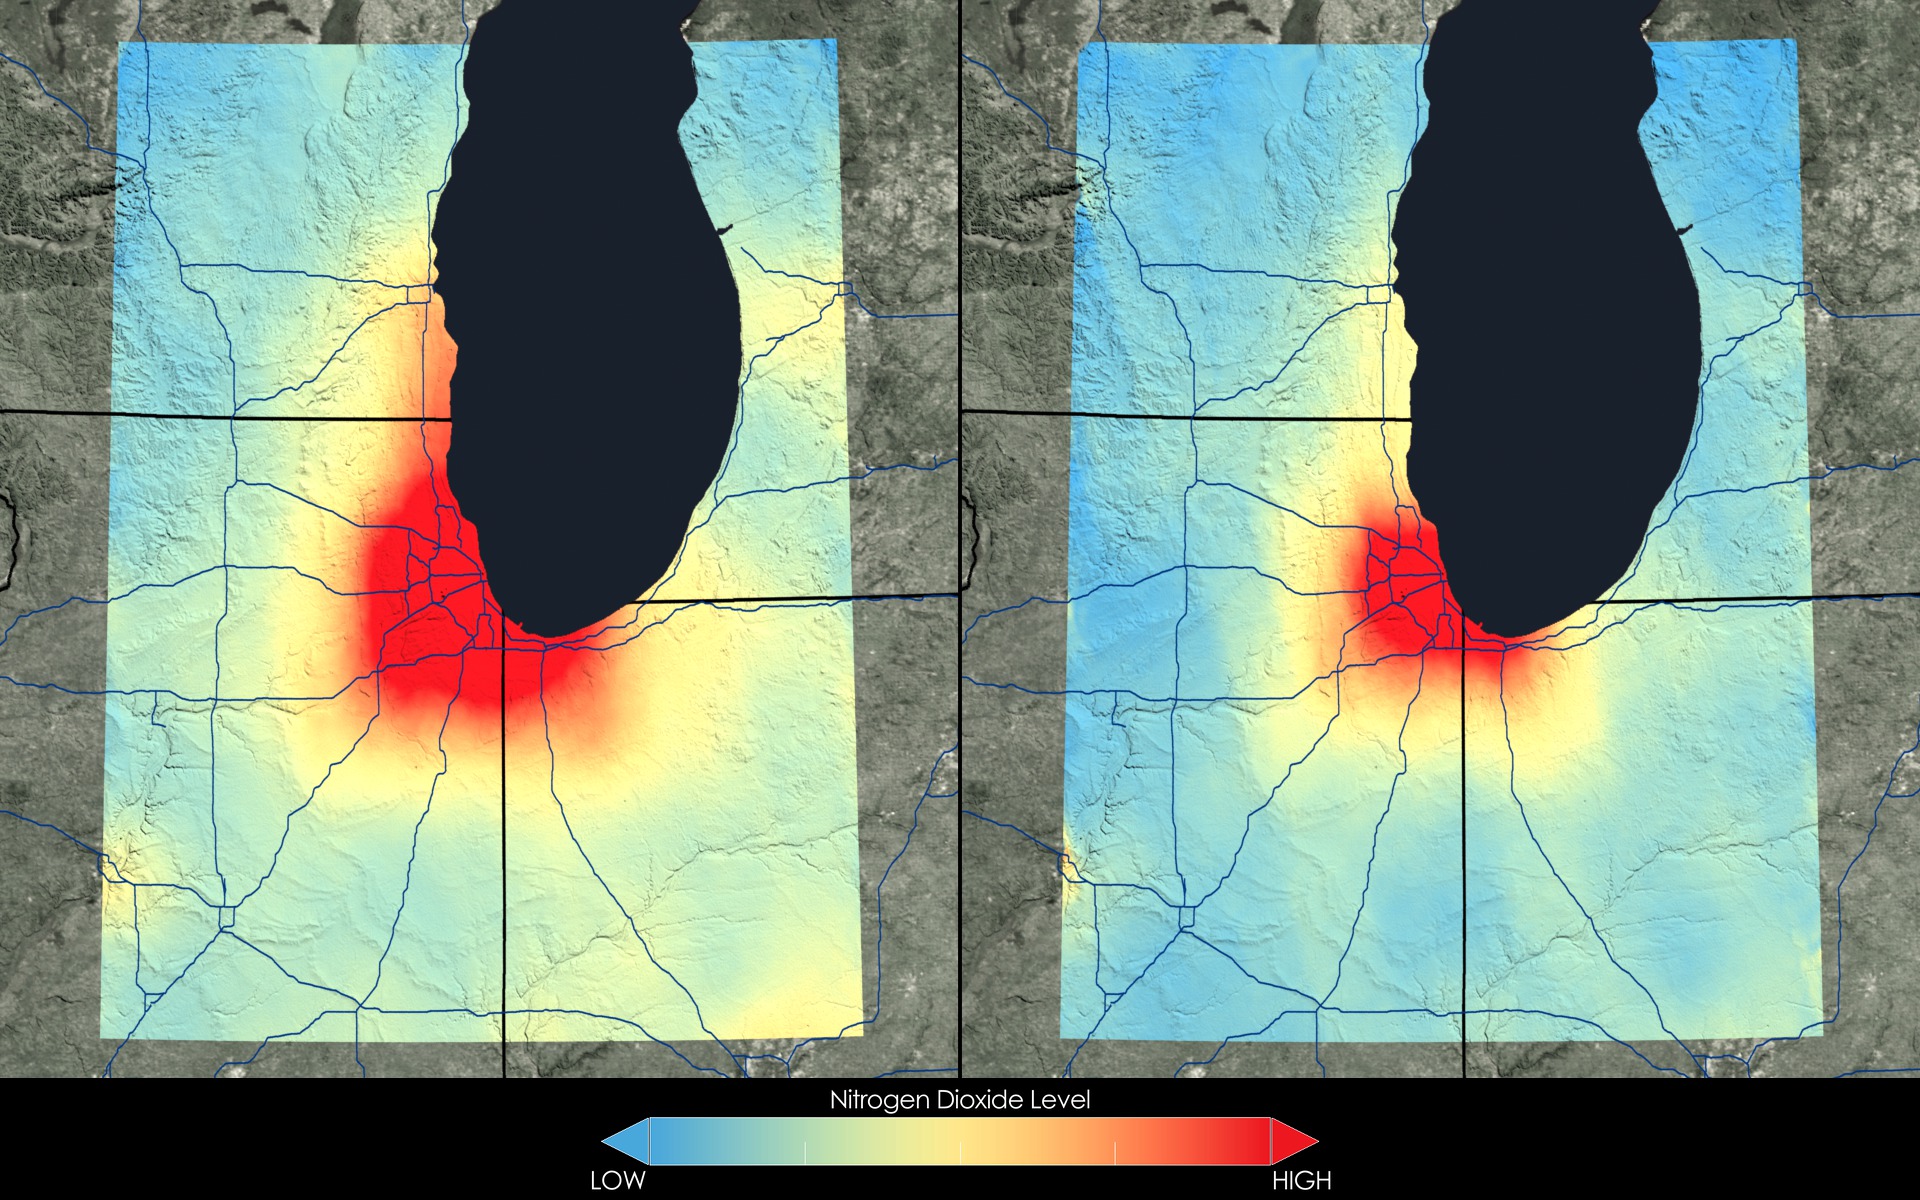 ChicagoSatellite data show that Chicago has seen a 43 percent decrease in nitrogen dioxide between the 2005-2007 (left) and 2009-2011 (right) periods. 